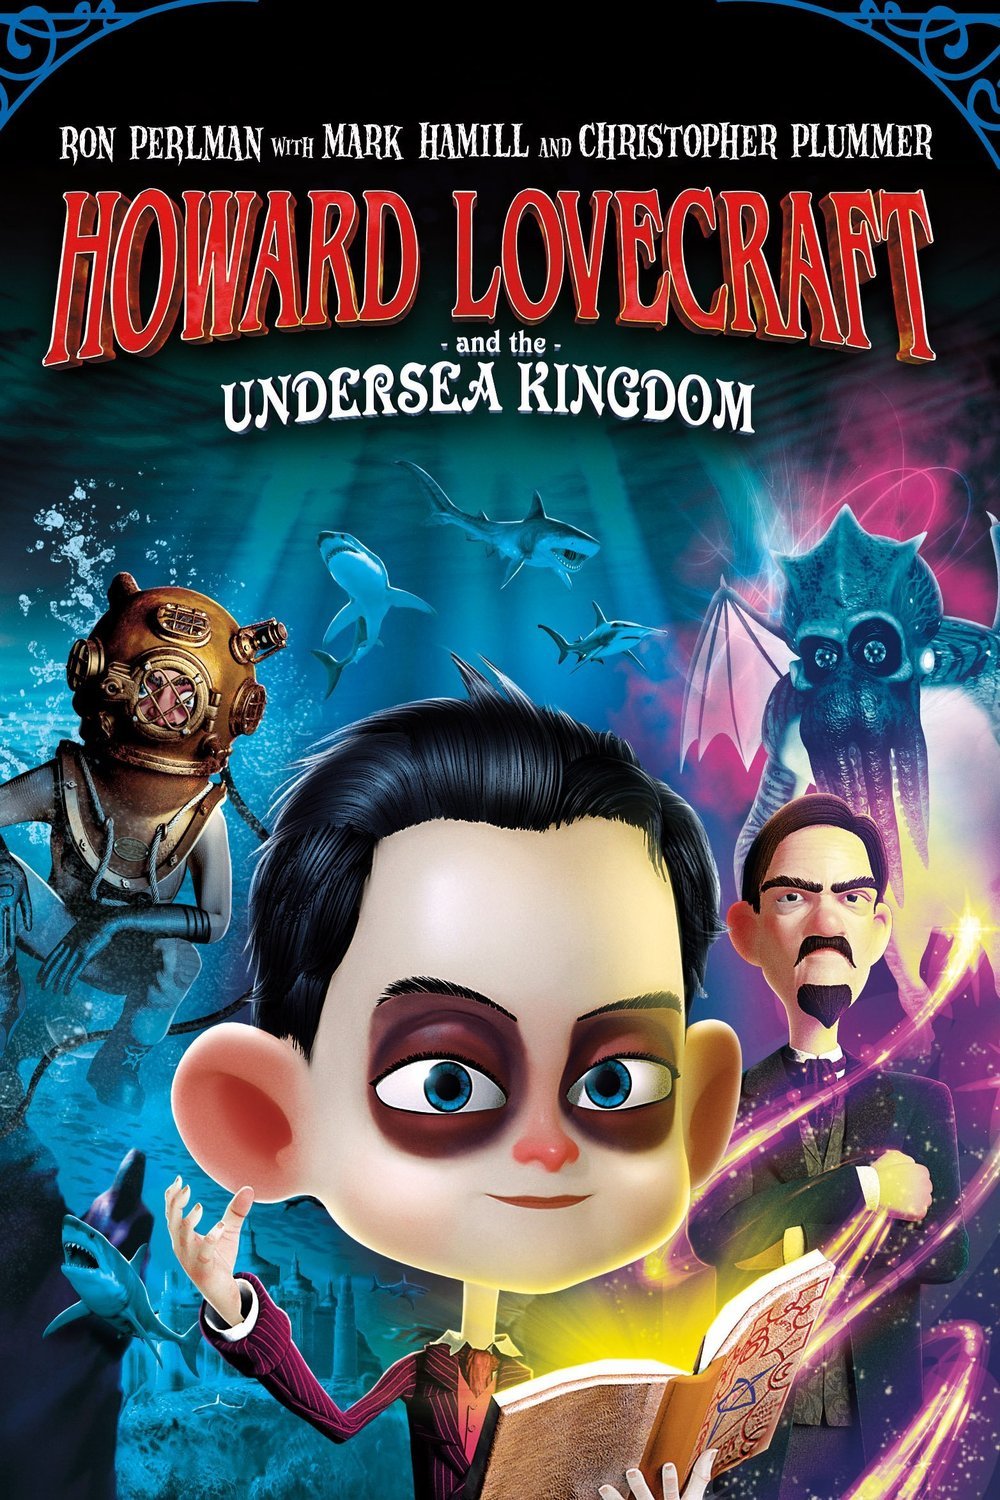 Poster of the movie Howard Lovecraft & the Undersea Kingdom